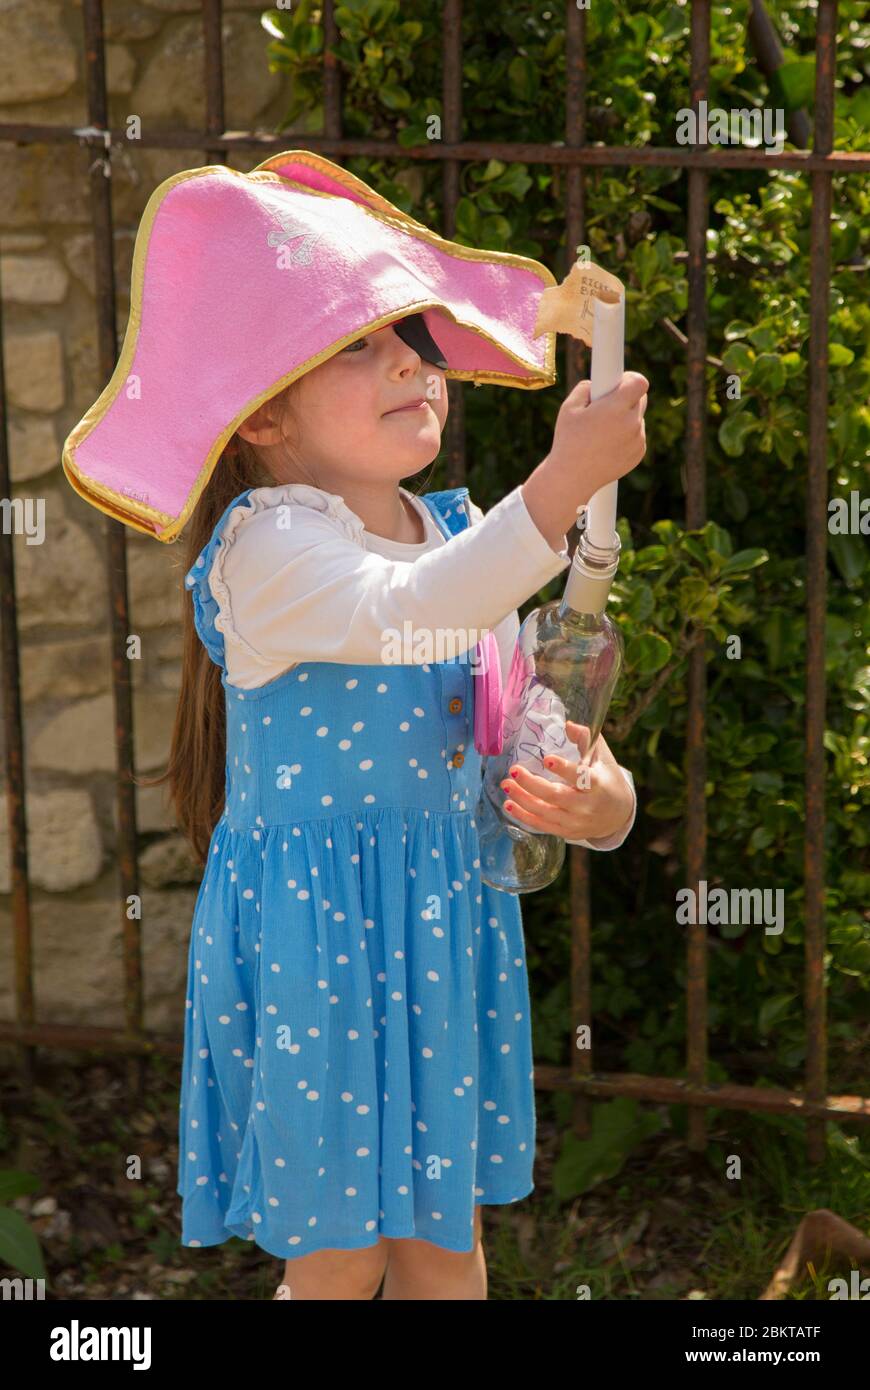 young girl on a pirate treasure hunt Stock Photo